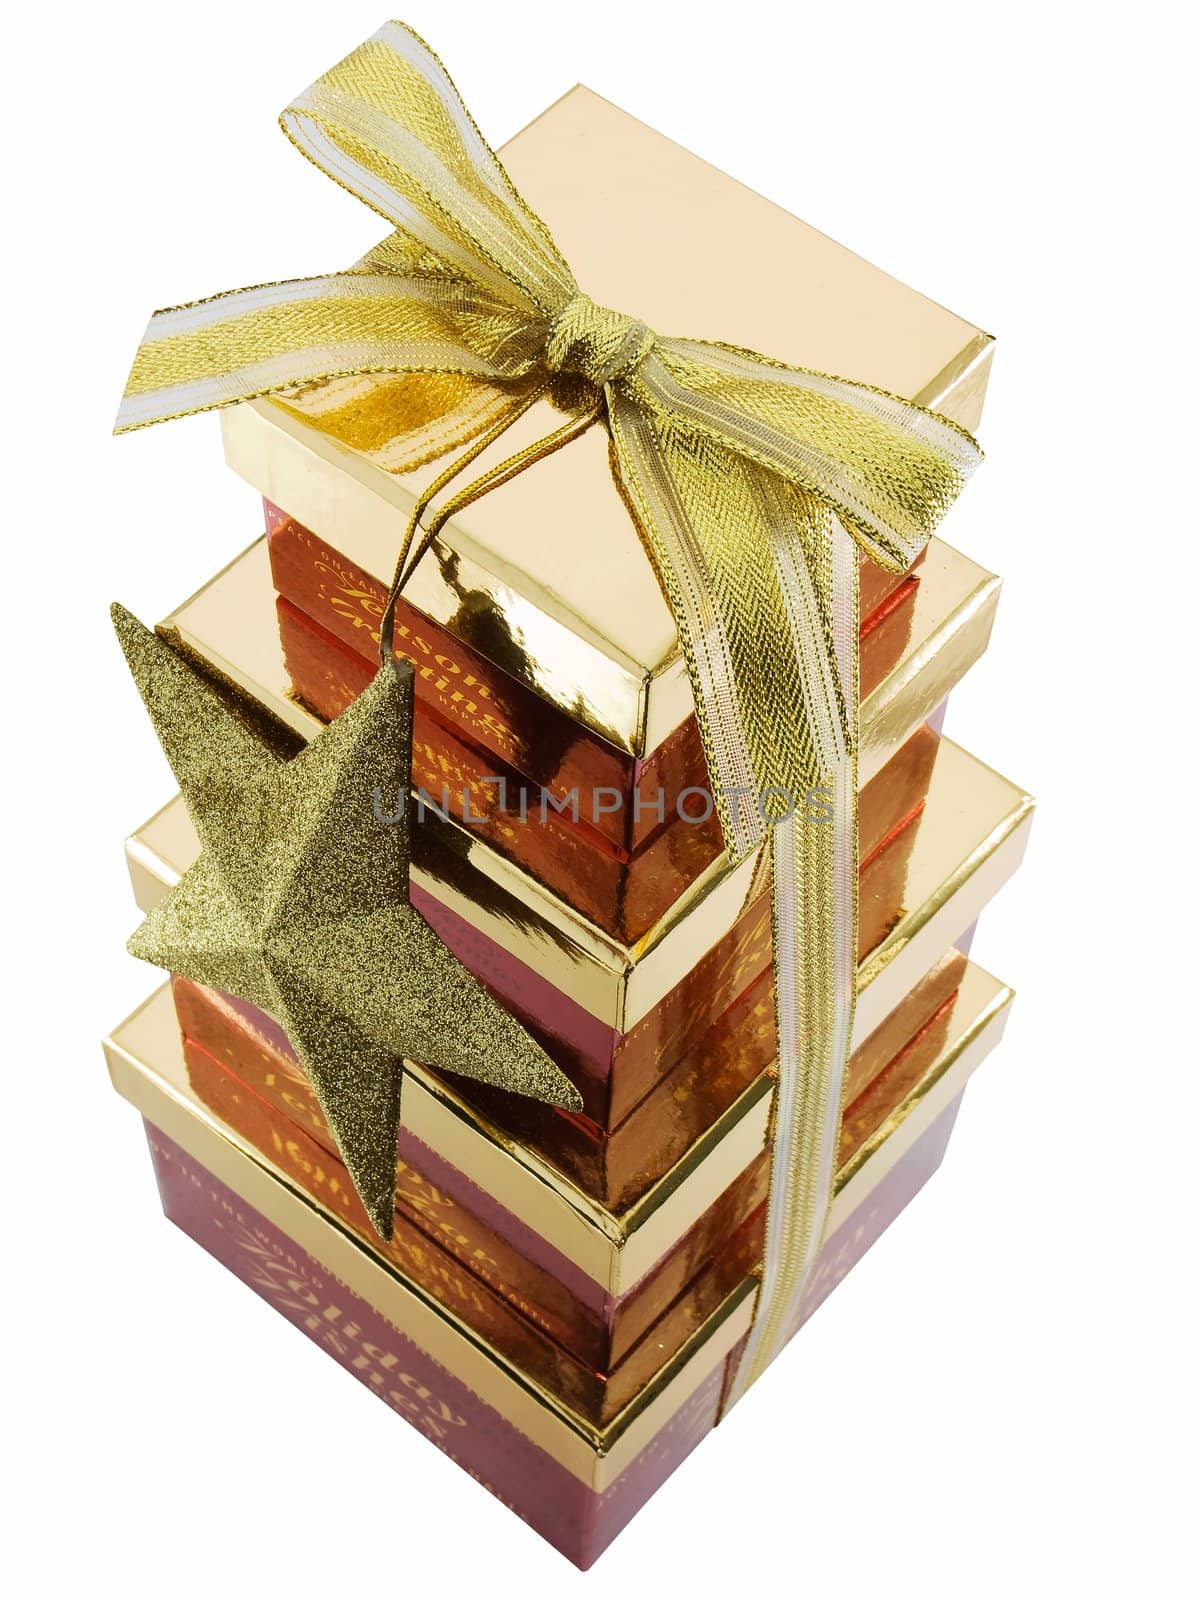 Christmas gift boxes stacked and tied with a ribbon, isolated on a white background